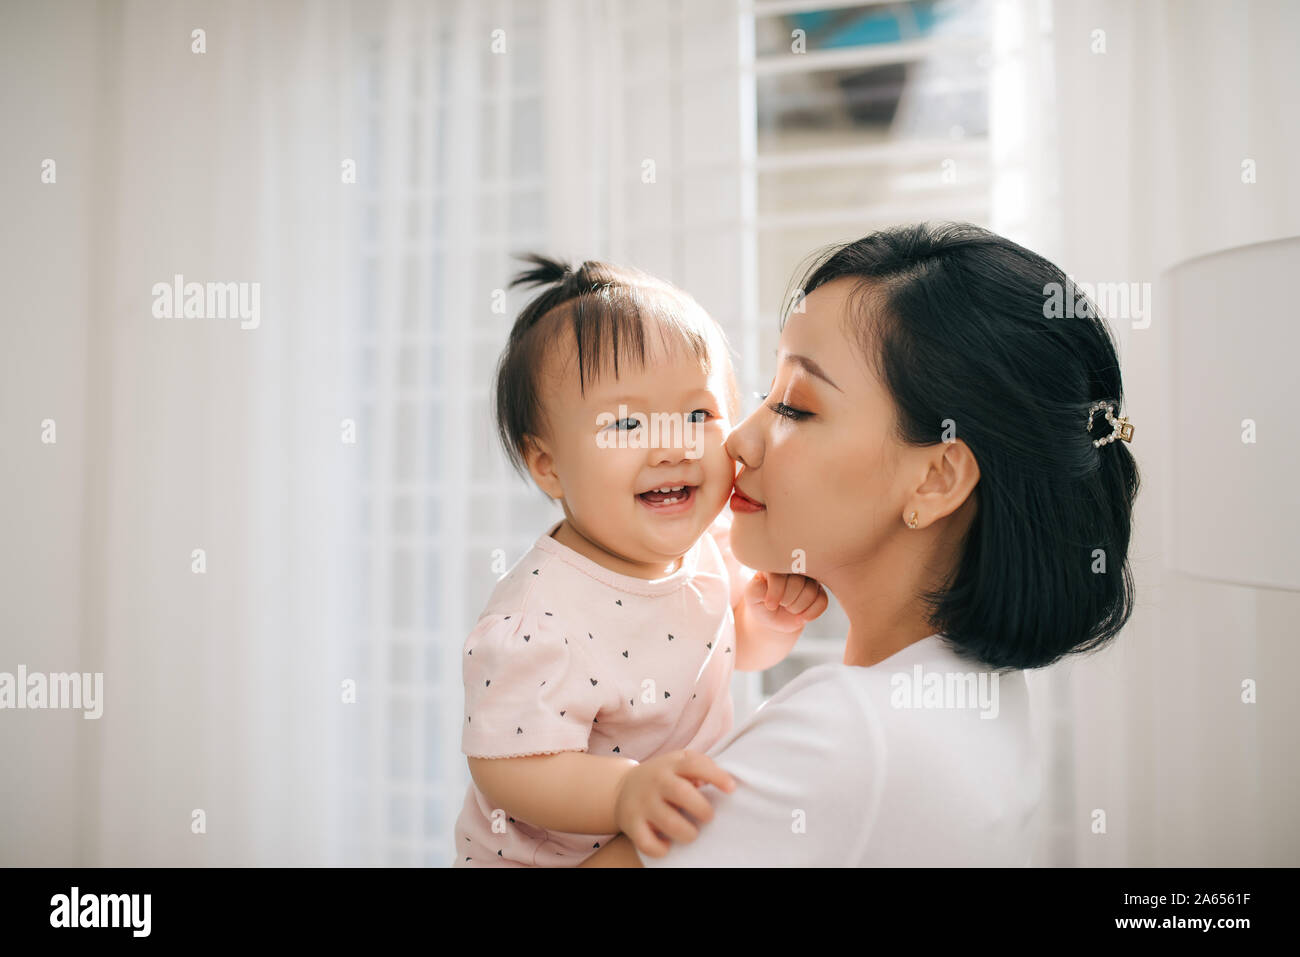 Single mom and daughter portrait. Happy family and people concept. Mother and Children day theme. Stock Photo